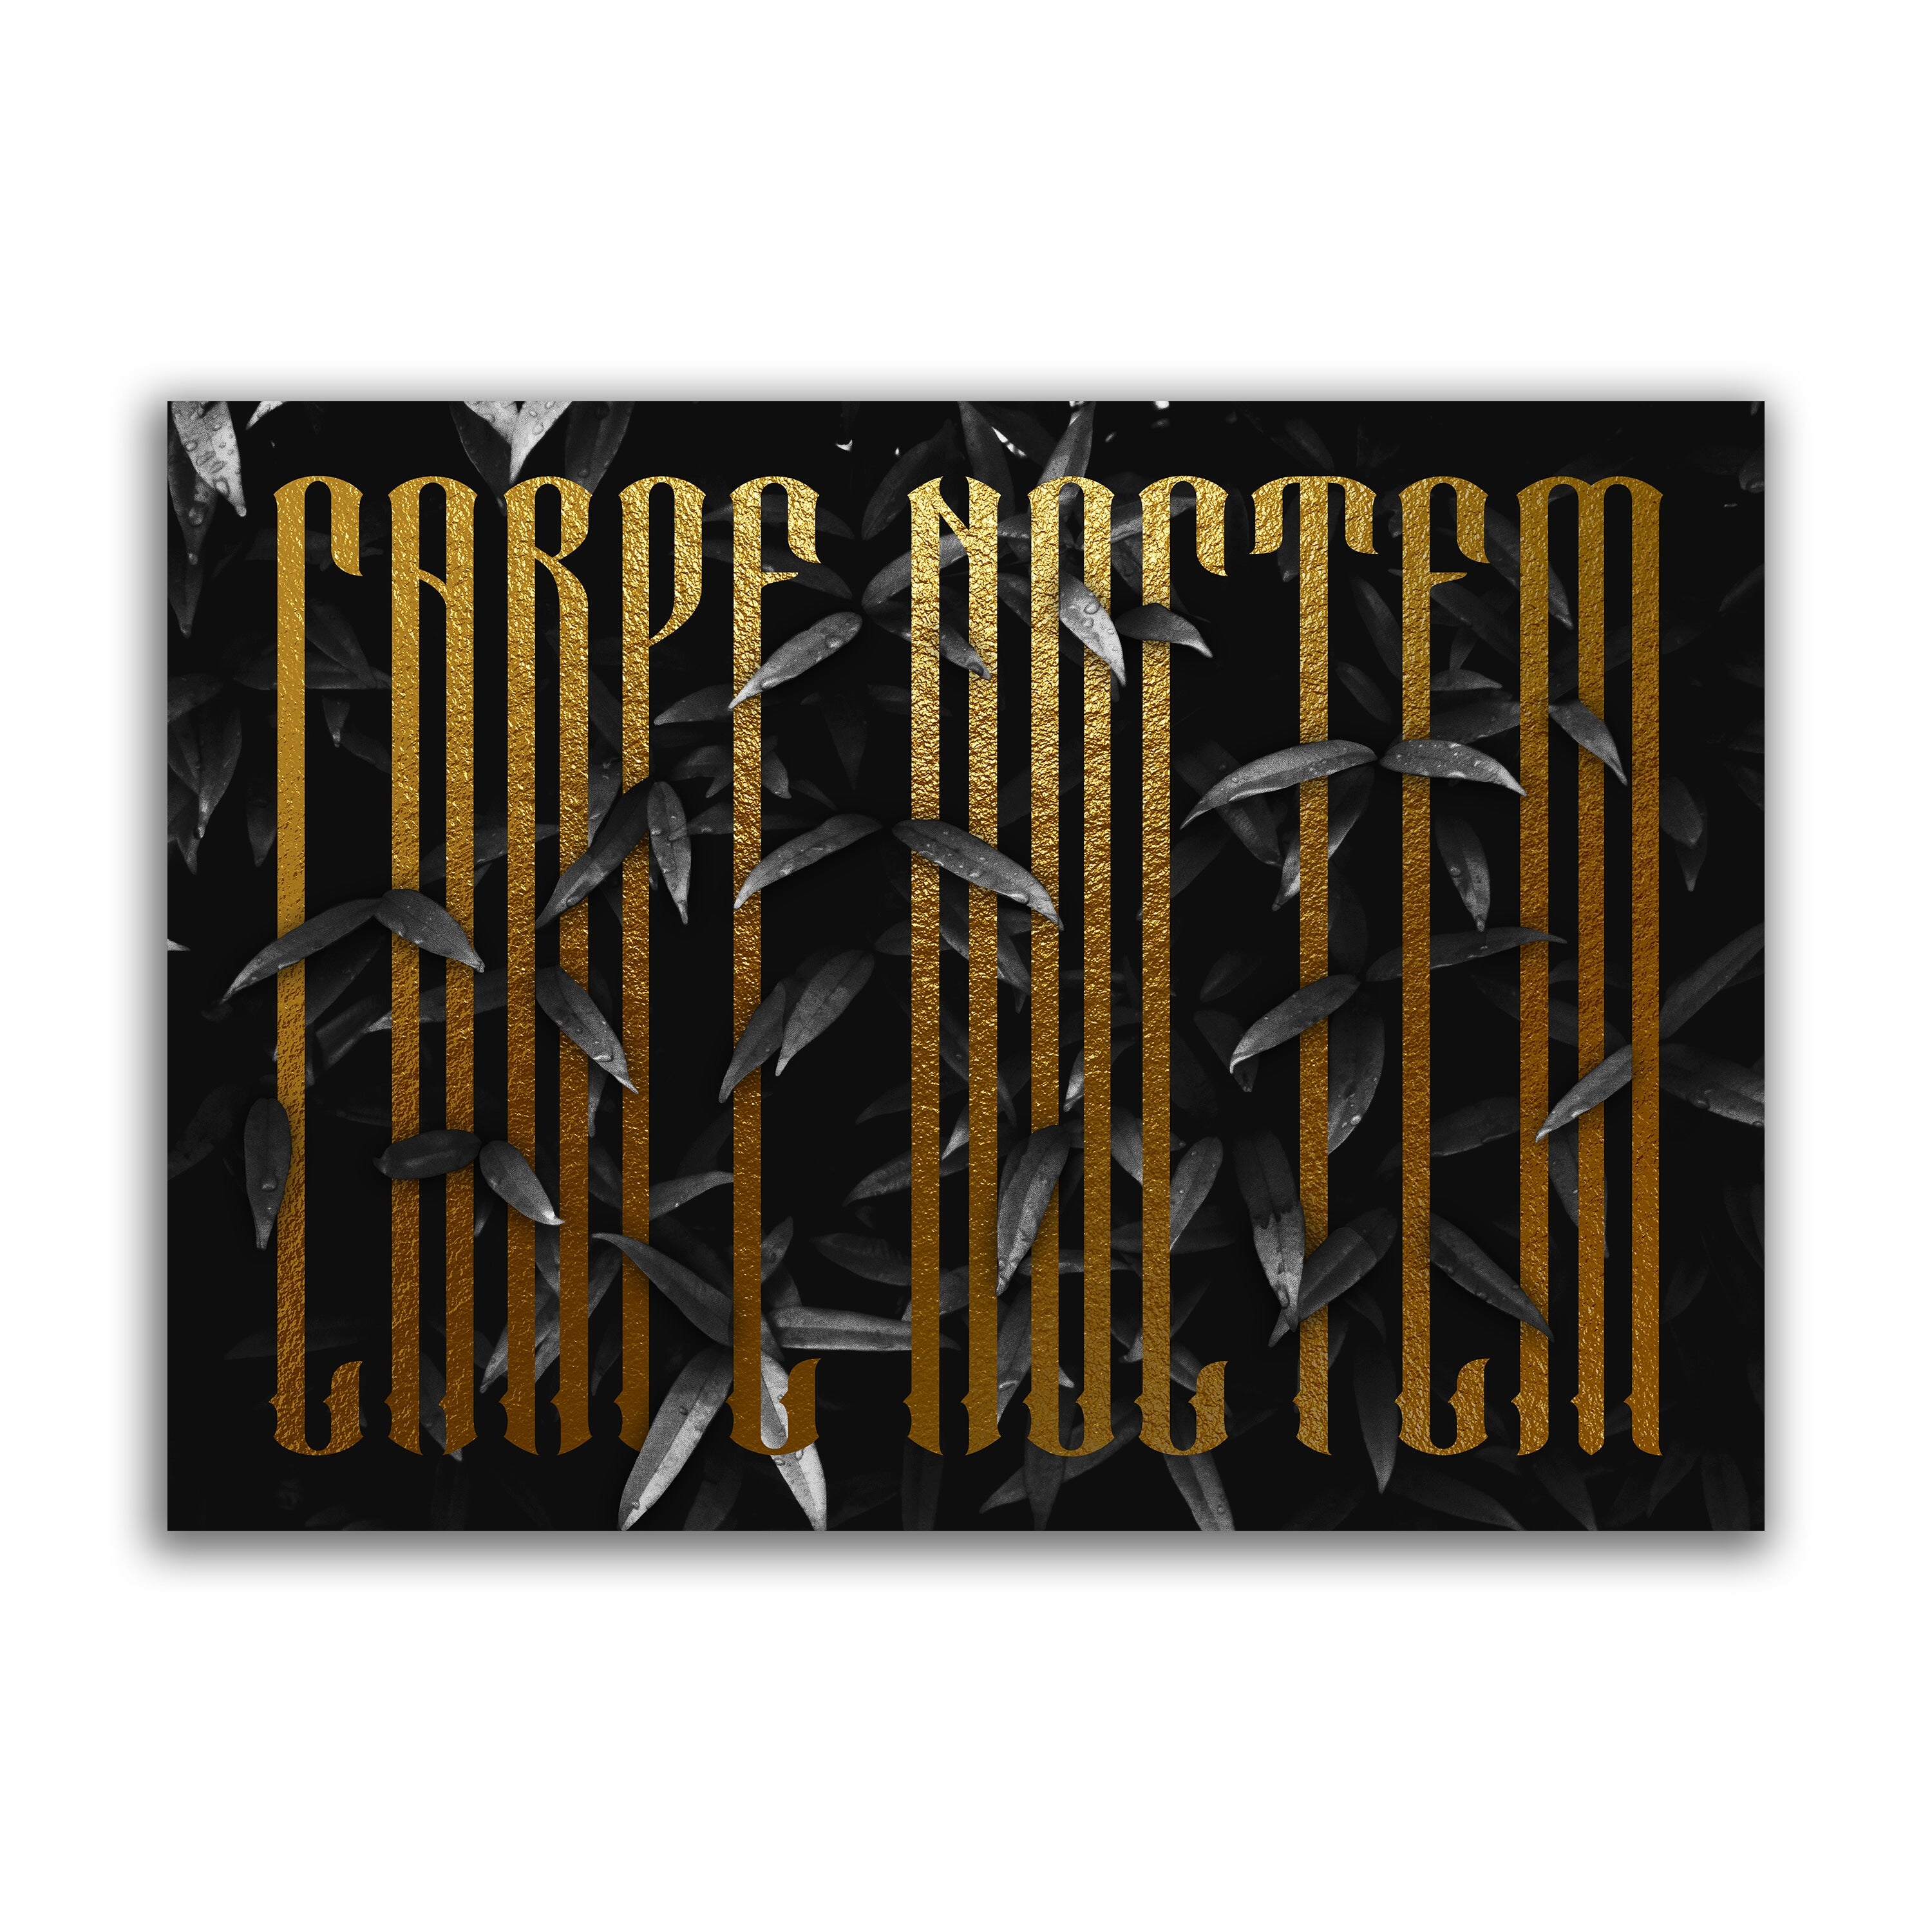 Carpe Noctem black and gold typography print by The Blackened Teeth